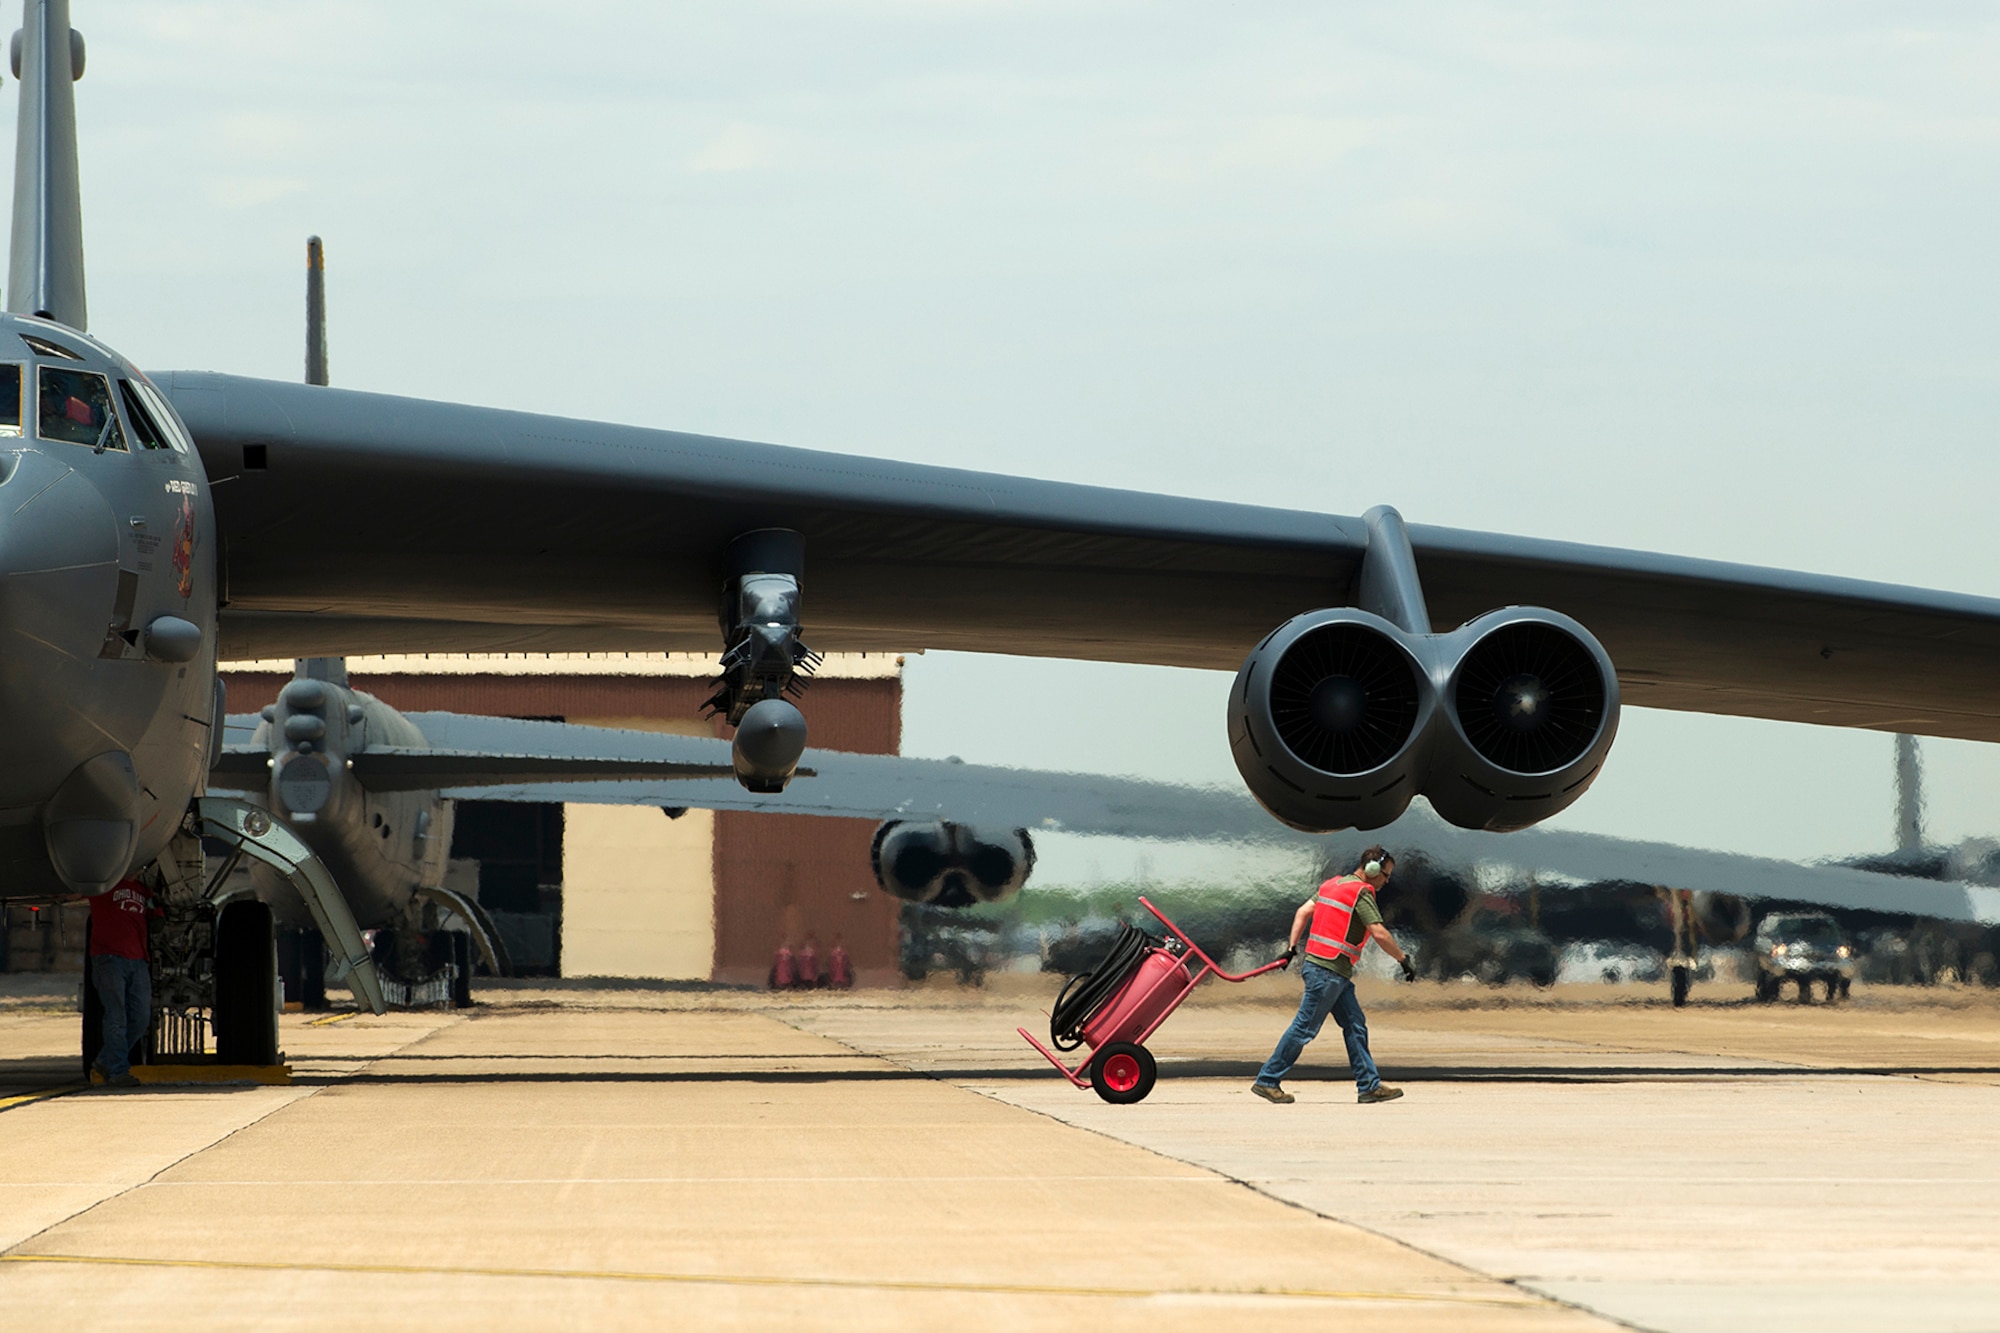 A 307th Aircraft Maintenance Squadron crewchief prepares to launch a B-52H Stratofortress on its first mission carrying the AN/ASQ-236 Radar Pod, April 21, 2014, Barksdale Air Force Base, Louisiana. The 307th Bomb Wing is testing the pod, which will give B-52s the ability to precisely geo-locate points of interest and conduct surveillance activities day or night, in adverse weather conditions. (U.S. Air Force photo by Master Sgt. Greg Steele/Released)